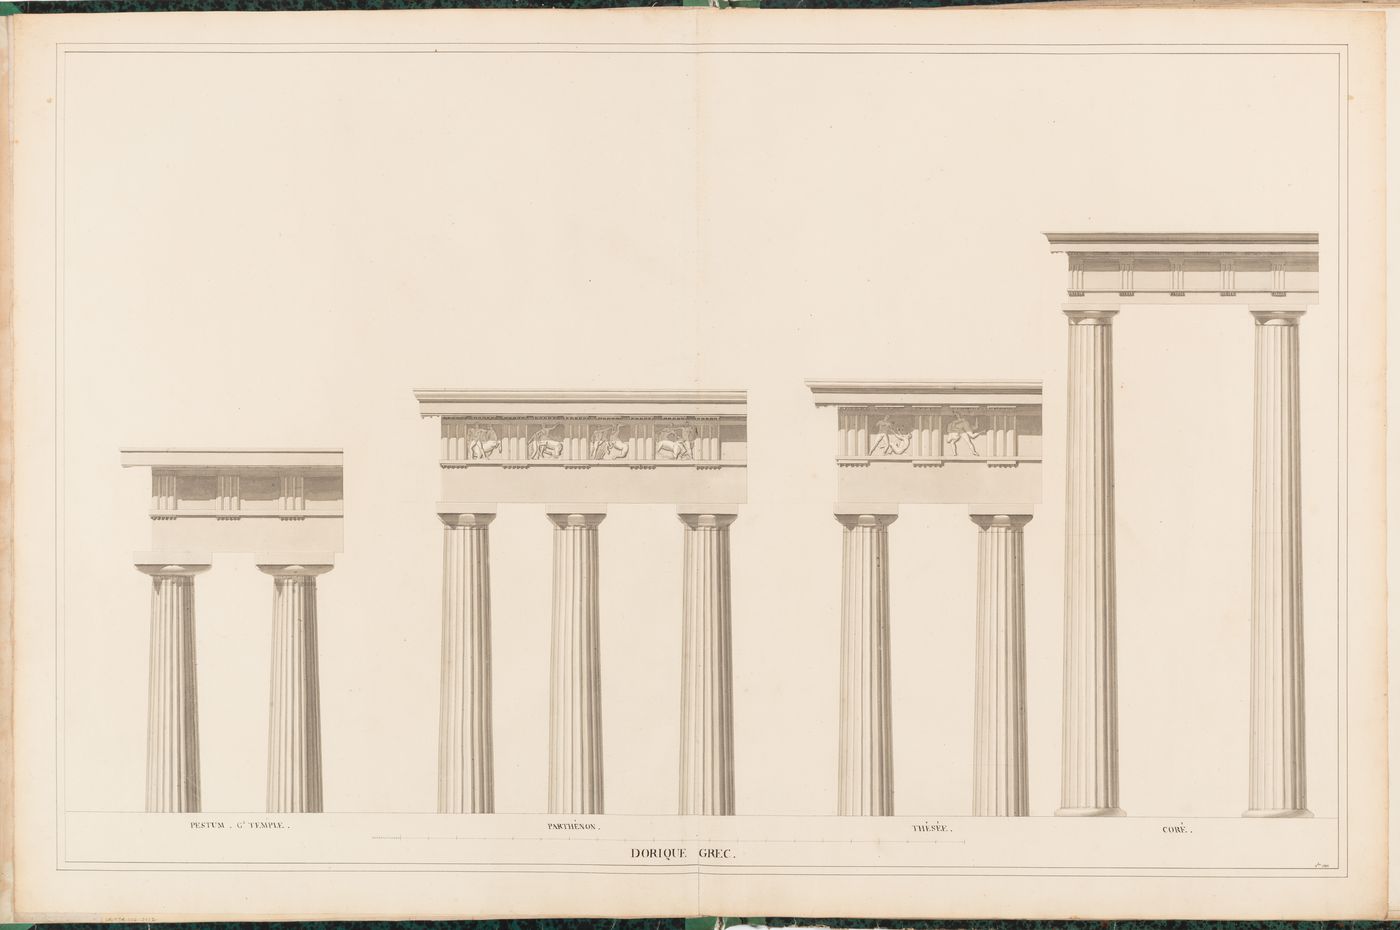 Elevations of columns and entablatures from four Greek Doric temples: the Temple of Neptune, Paestum, the Temple of Hercules, Cori, and the Parthenon and the Hephaisteion, Athens